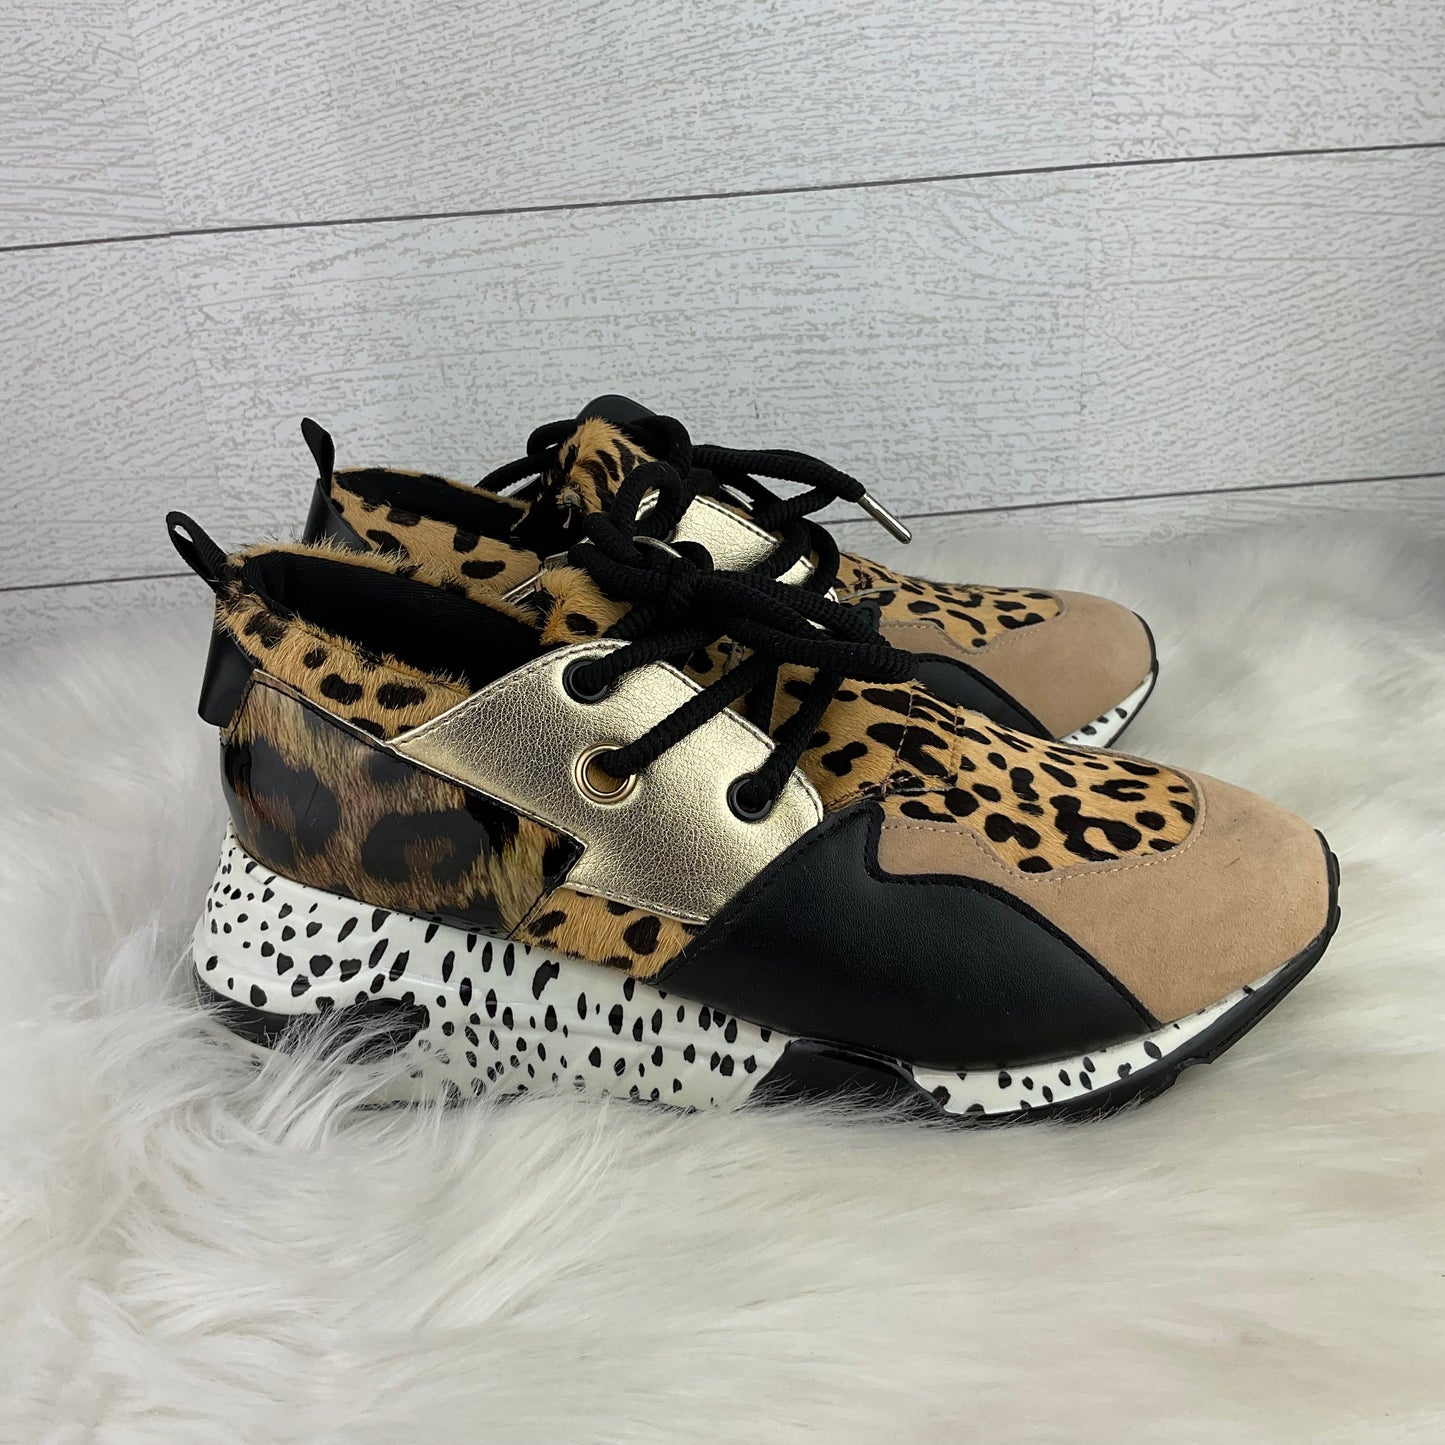 Animal Print Shoes Athletic Steve Madden, Size 7.5